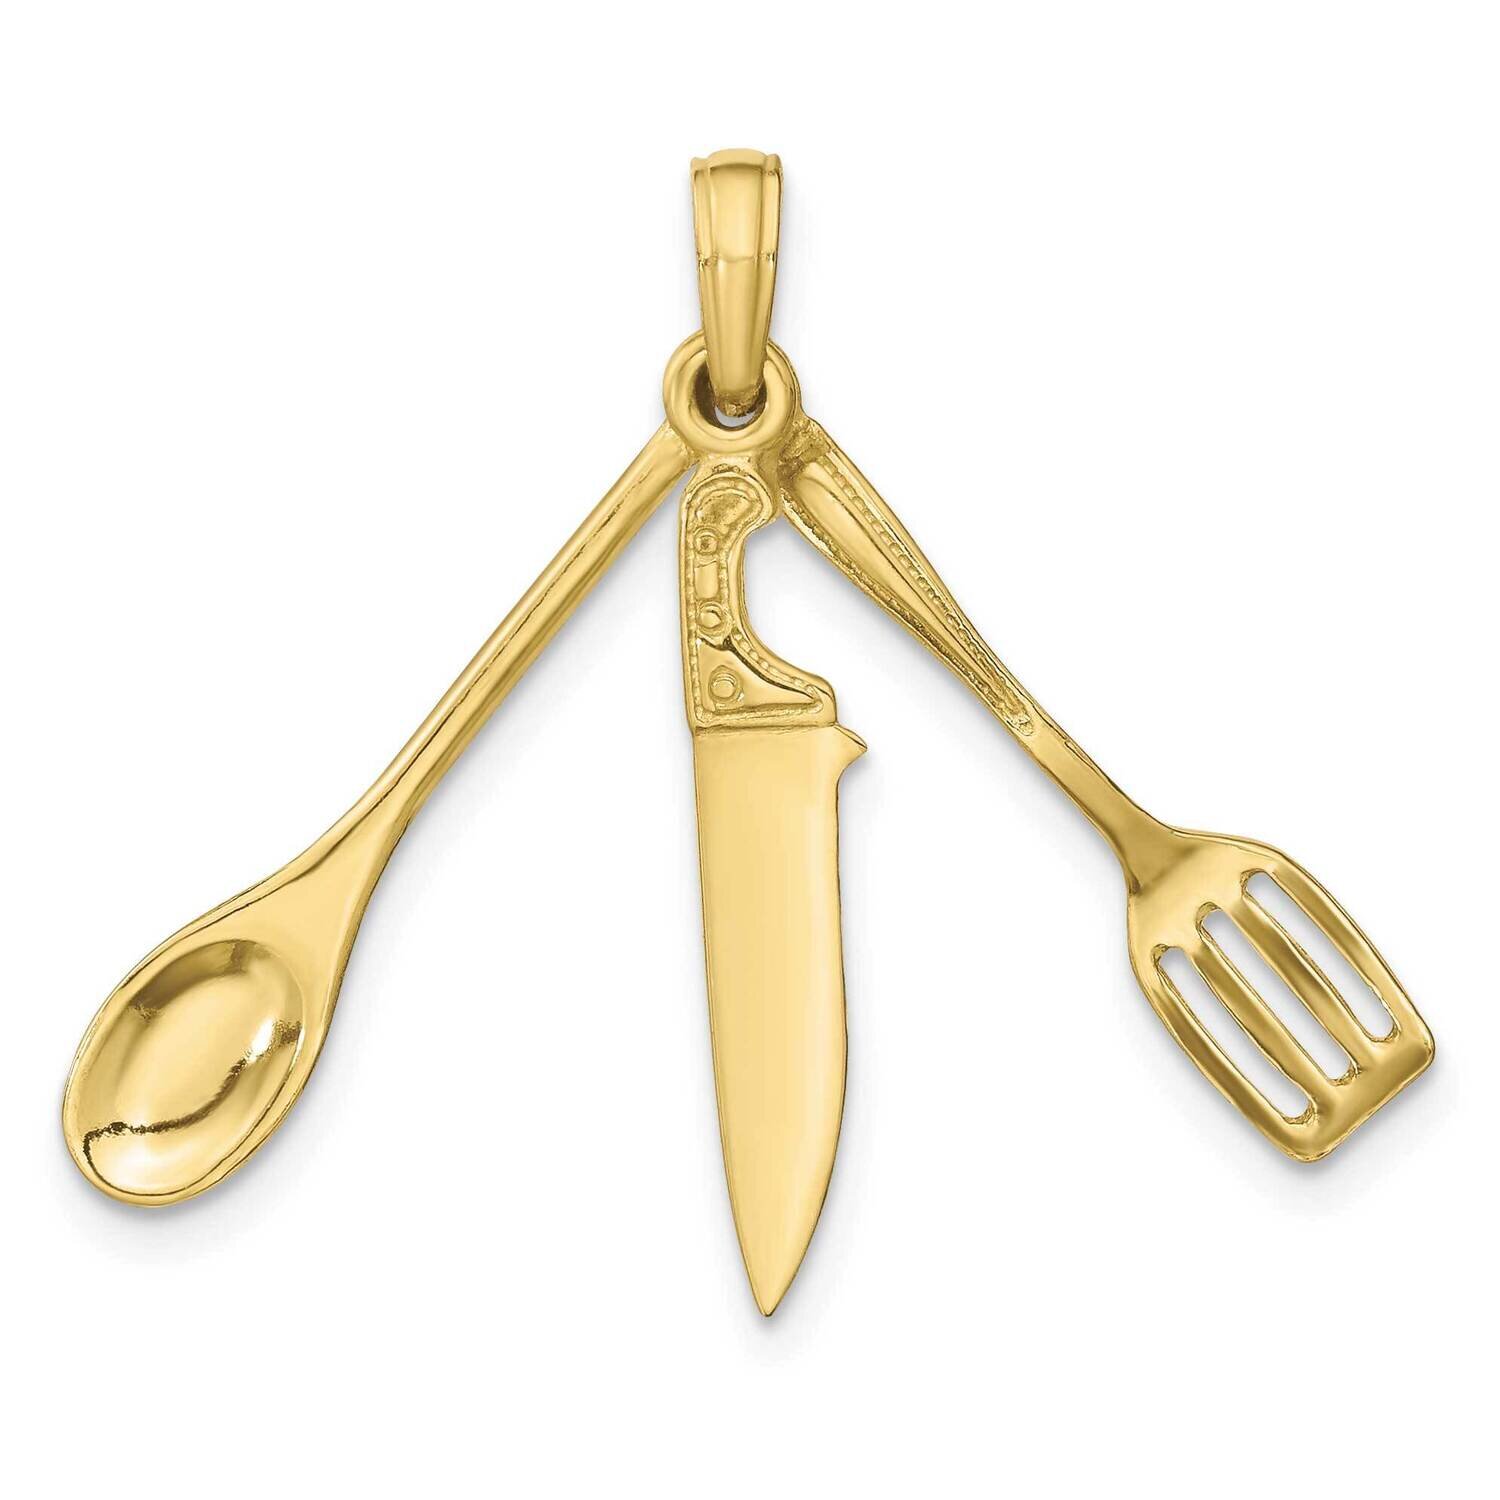 3-D Moveable Spatula, Spoon, and Knife Charm 10k Gold 10K7352